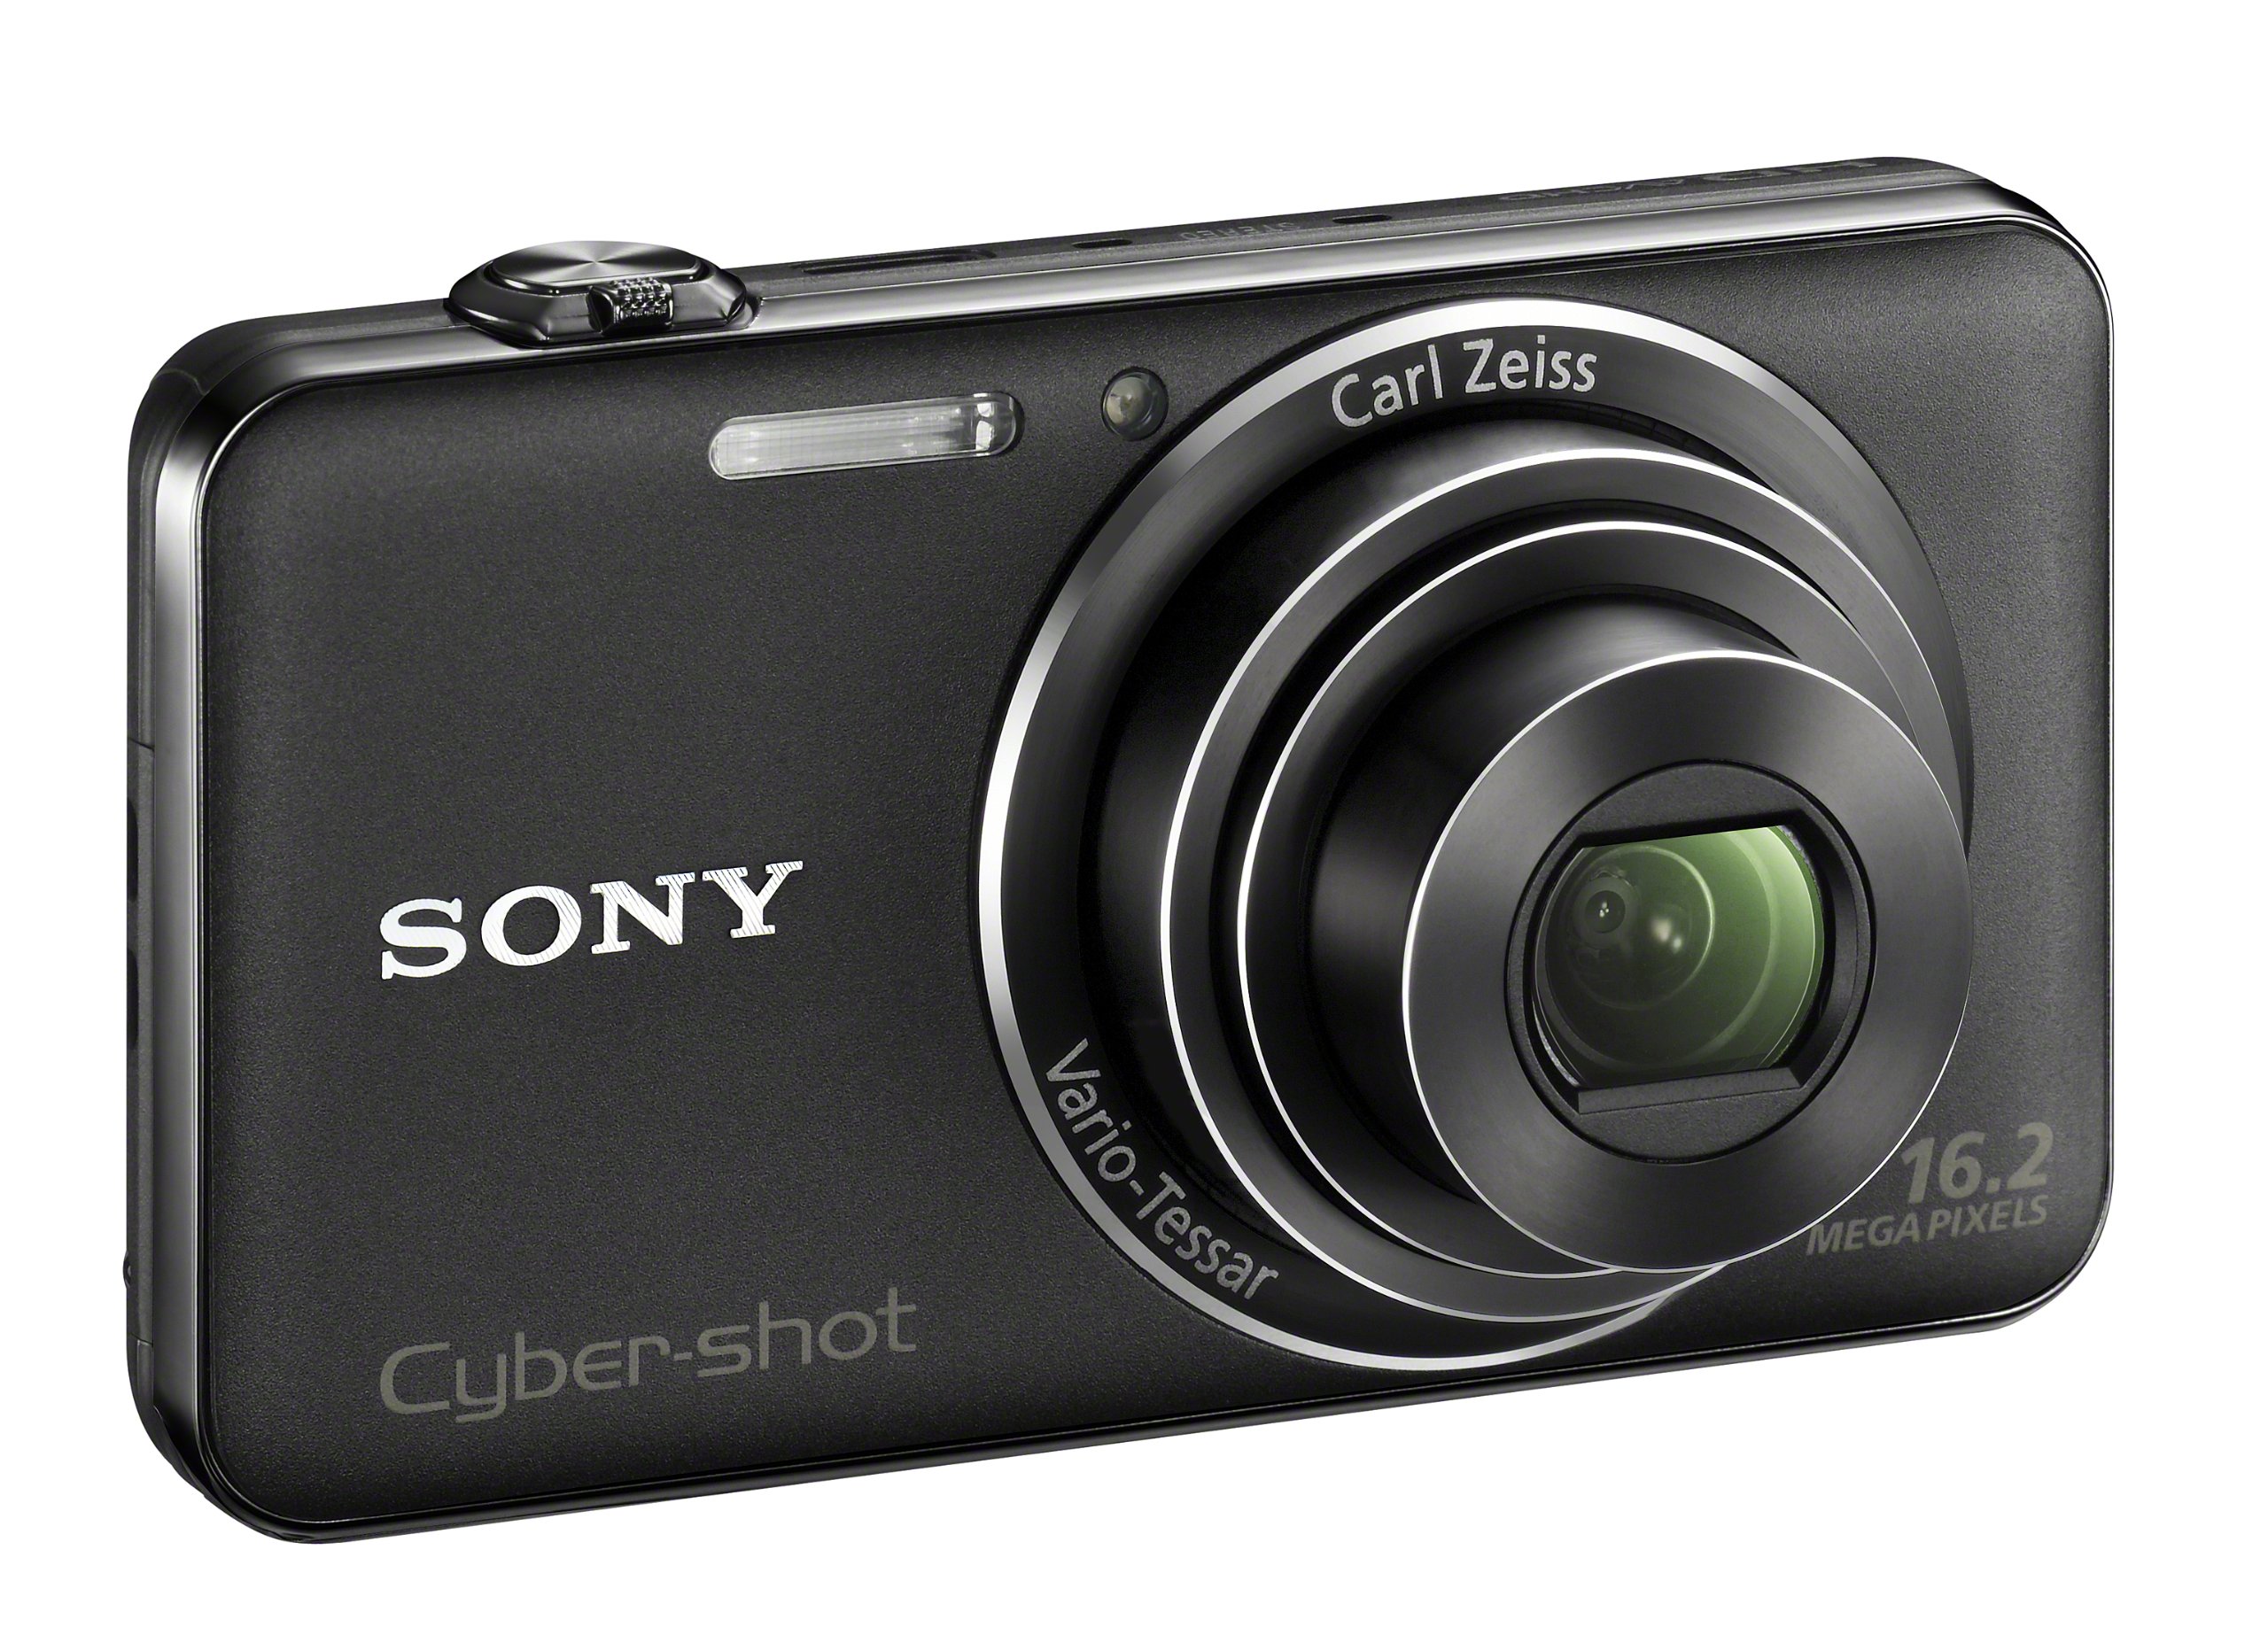 Sony Cyber-shot DSC-WX50 16.2 MP Digital Camera with 5x Optical Zoom and 2.7-inch LCD (Black) (2012 Model)